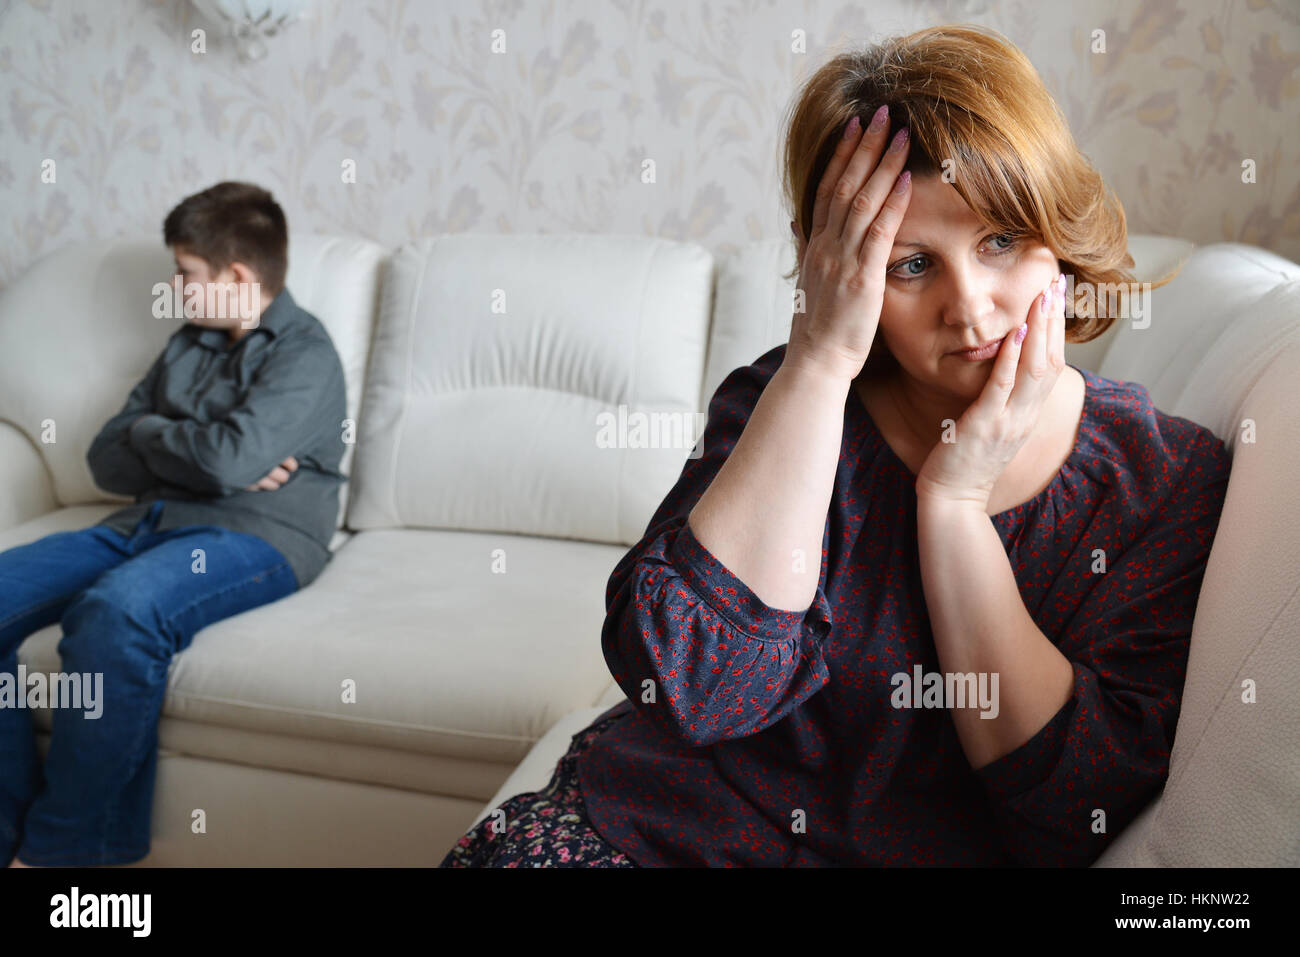 Mother and son after quarrel sit on couch Stock Photo